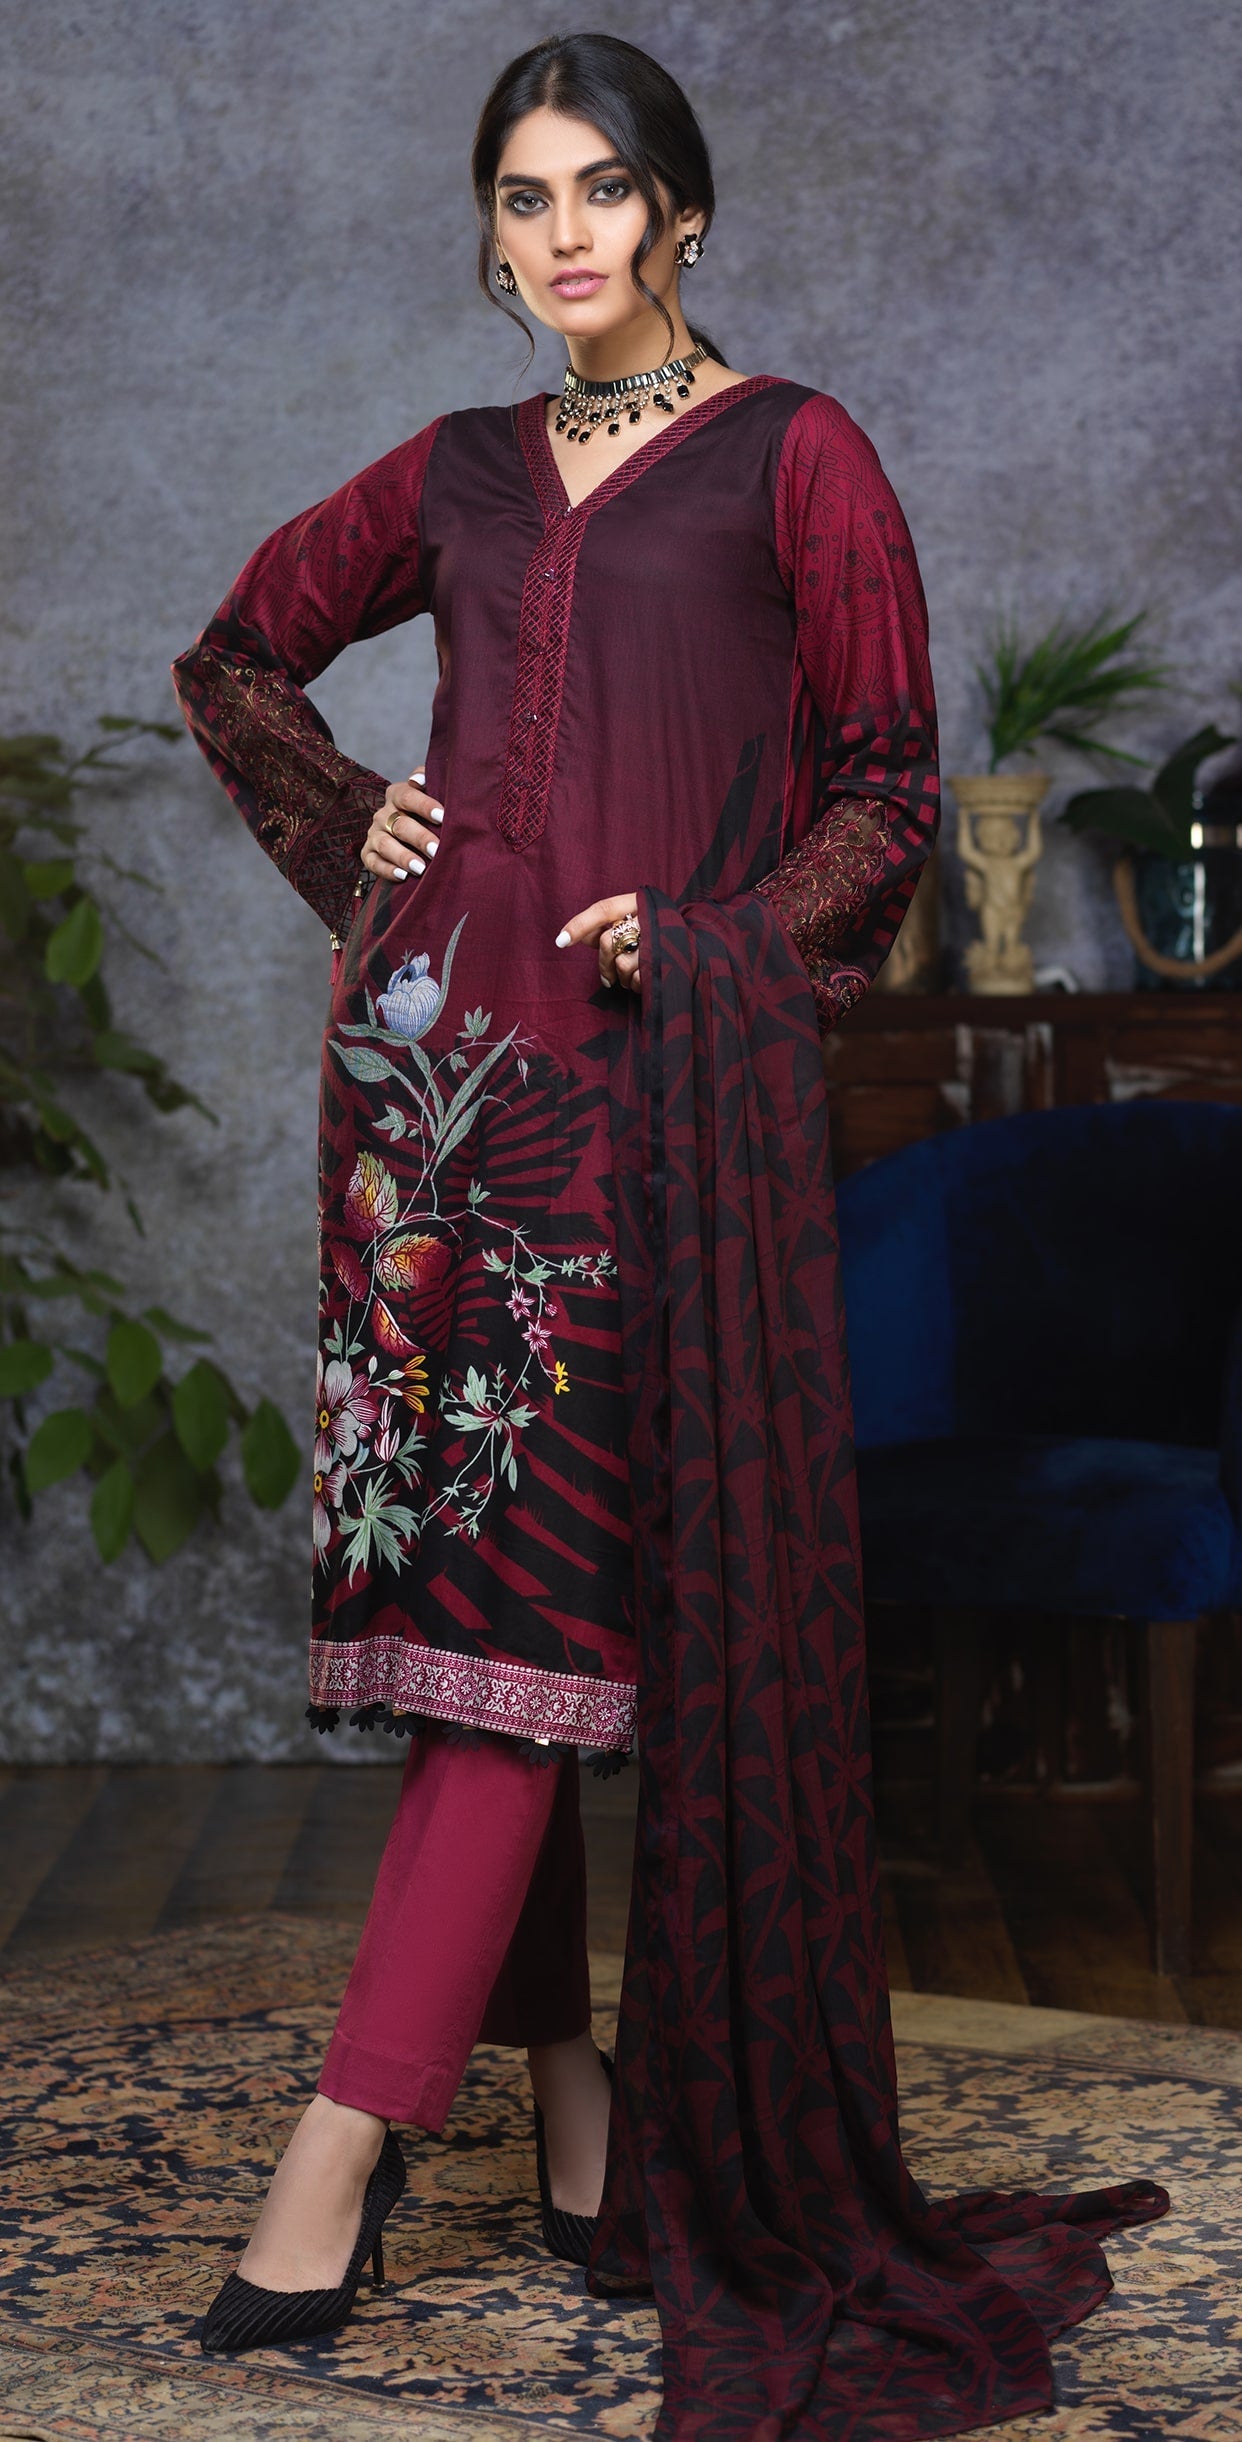 Stitched Printed Cambric Shirt with Embroidery Sleeves and Embroidered Neck Lace , Printed Chiffon Dupatta & Dyed Trouser (RC-172A) - SalitexOnline